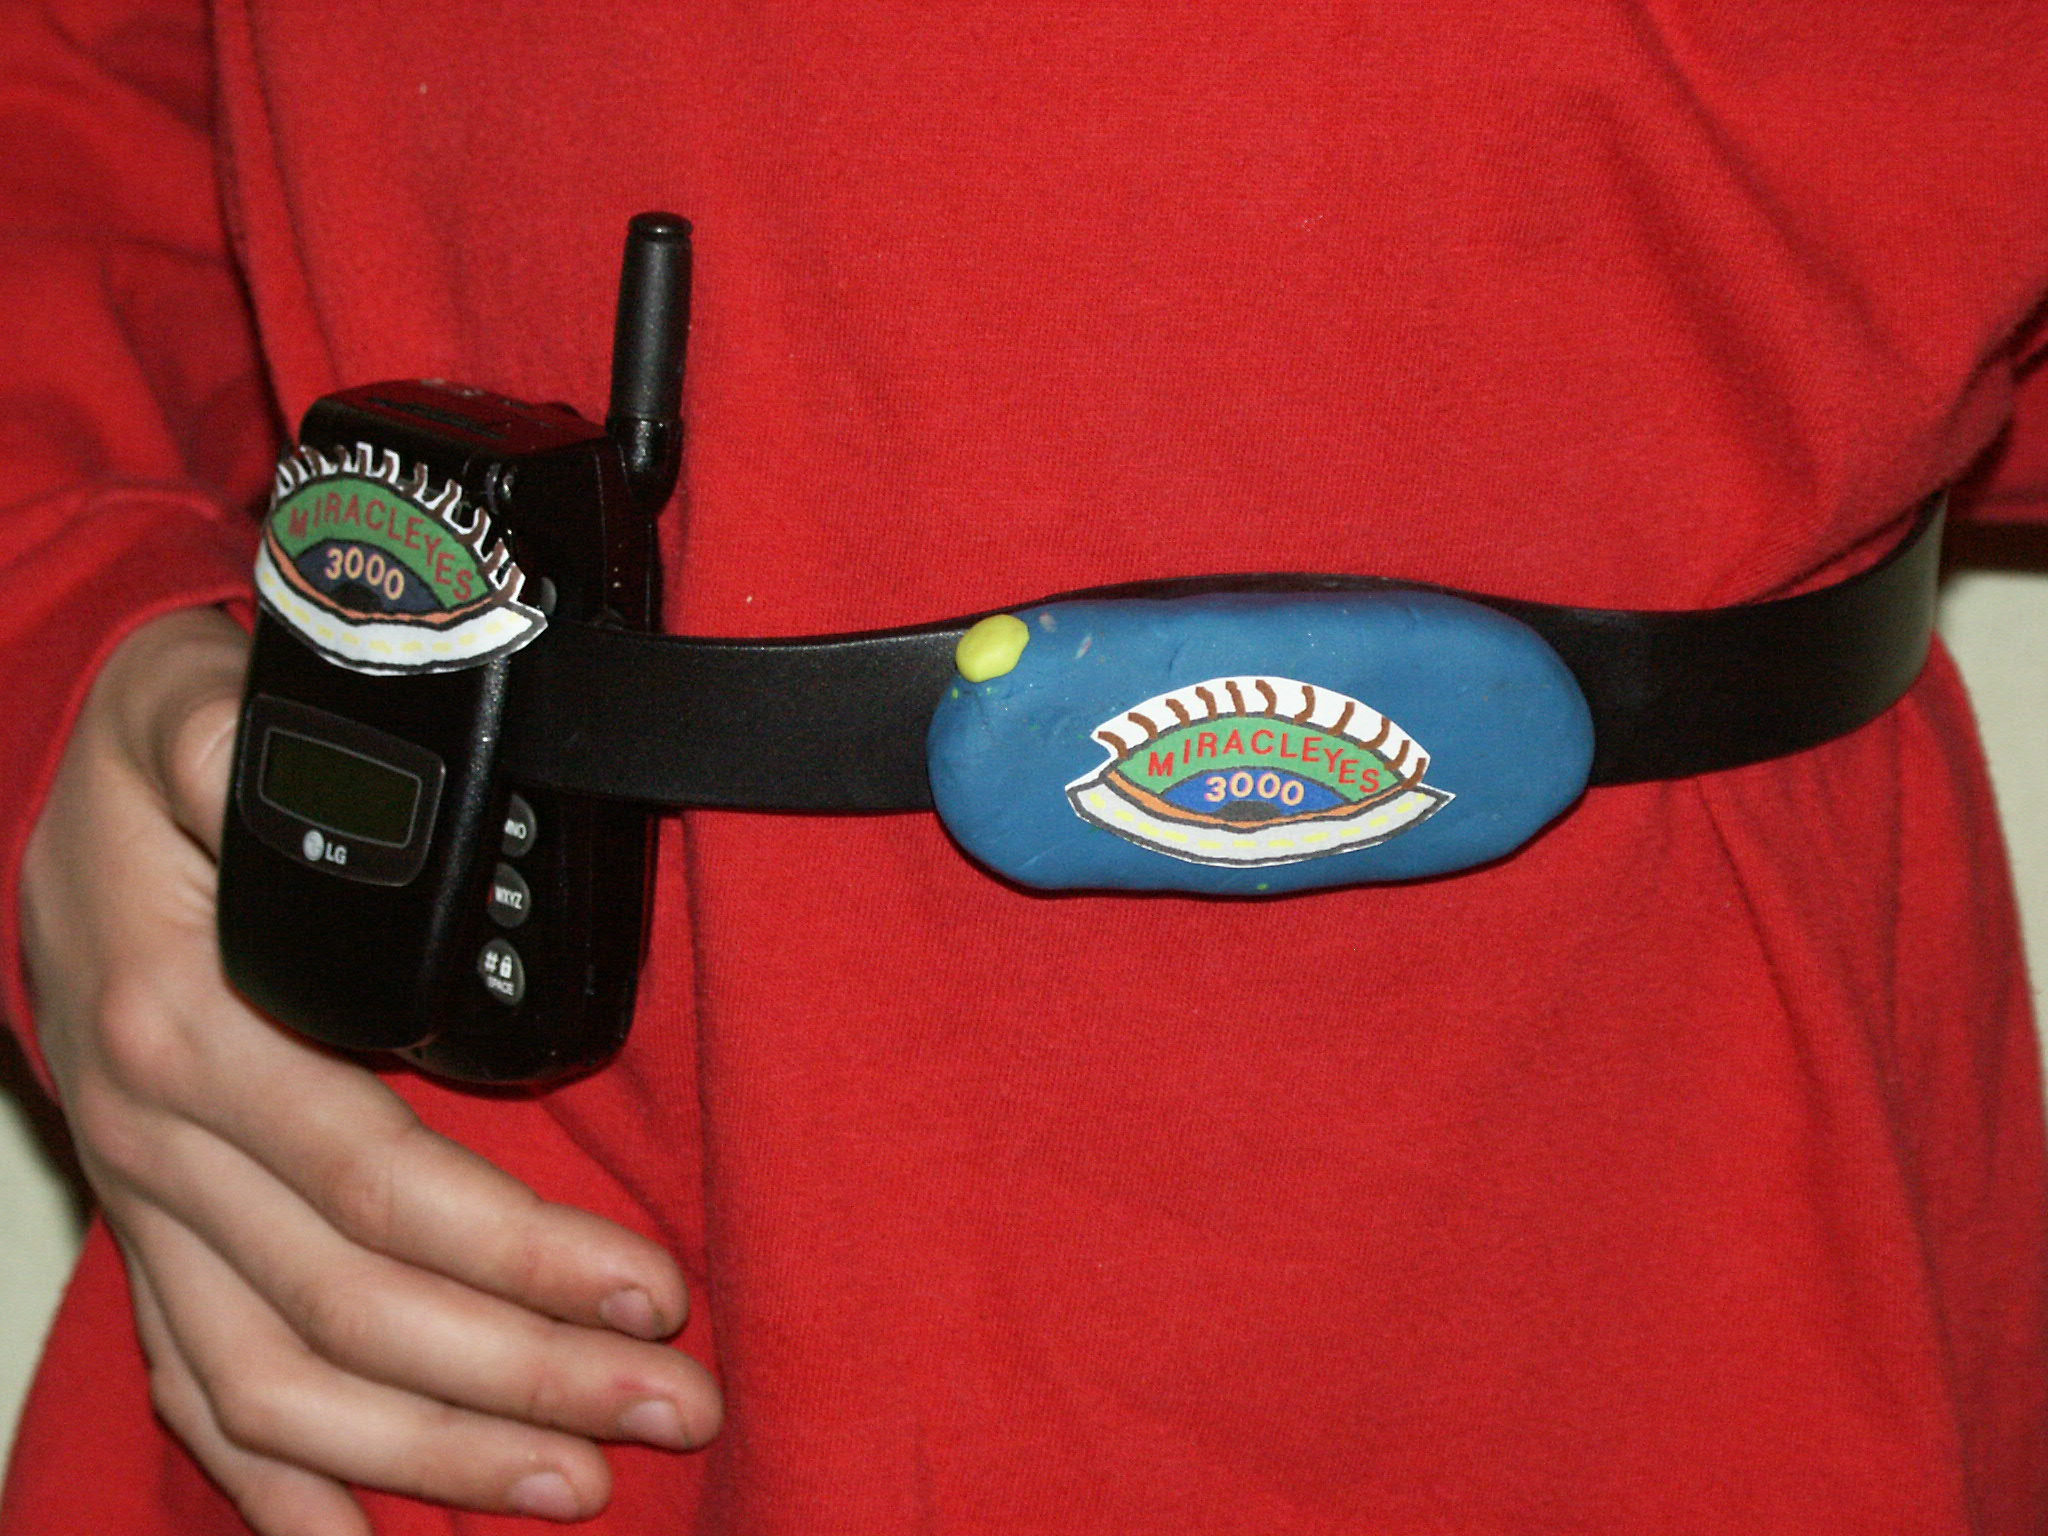 Photo of belt and cell phone on user's waist.